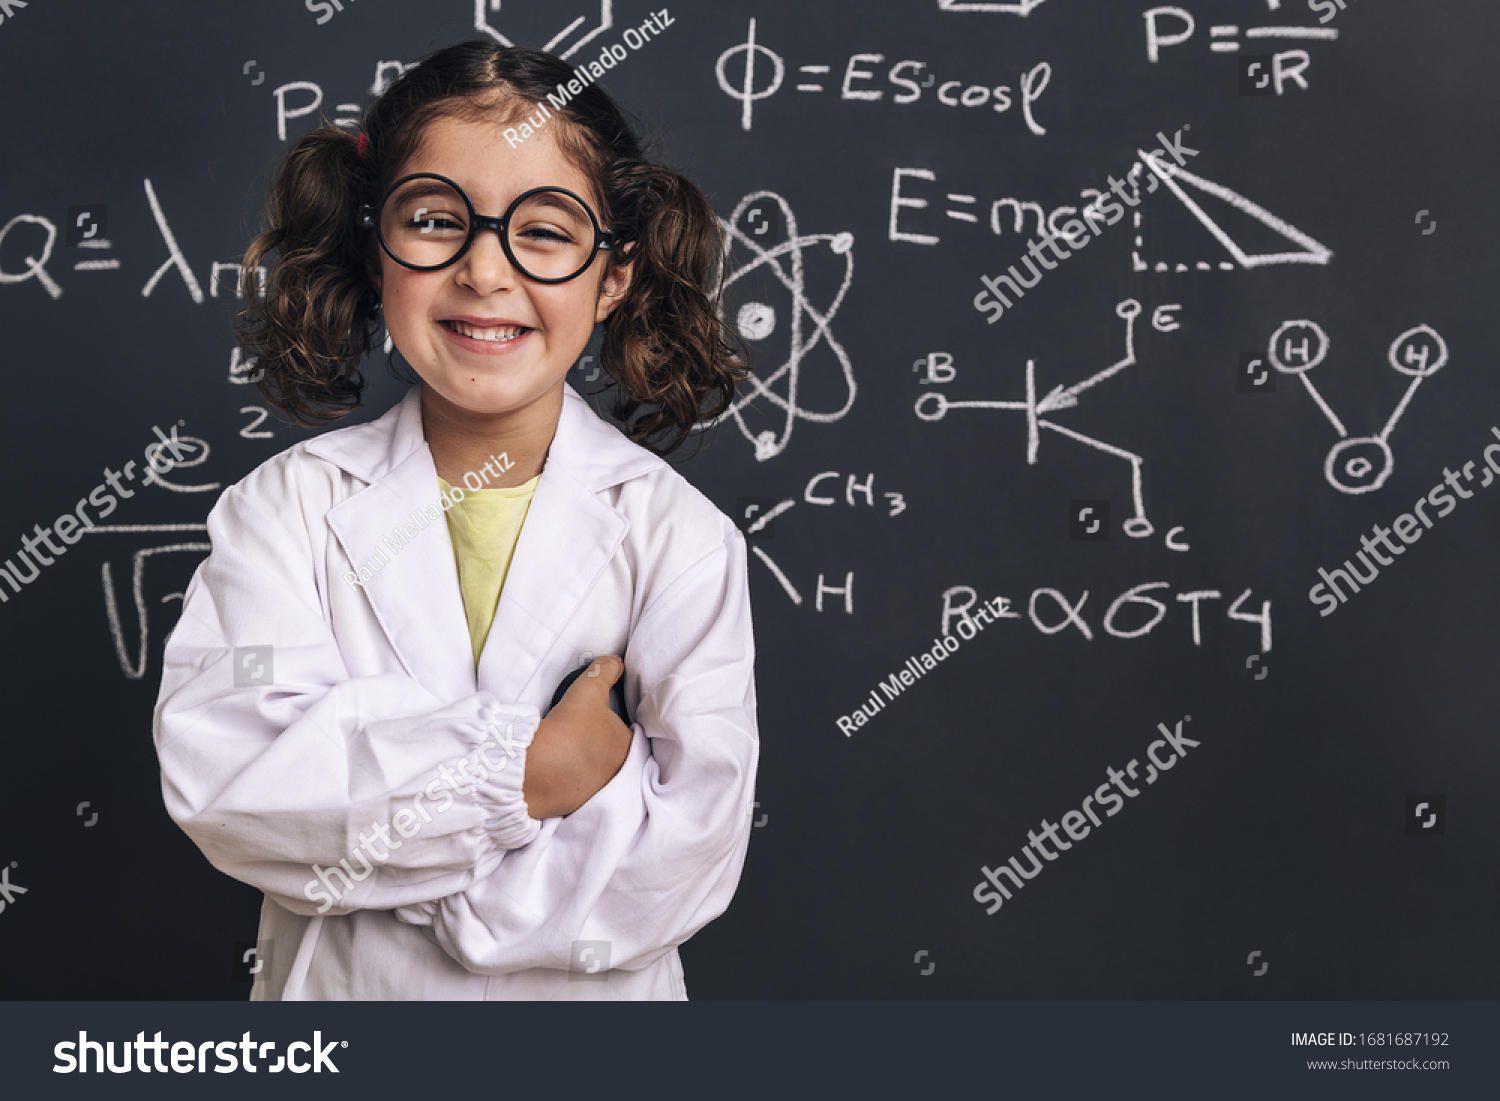 smiling little girl science student with glasses in lab coat on school blackboard background with hand drawings science formula pattern, back to school and successful female career concept #1681687192